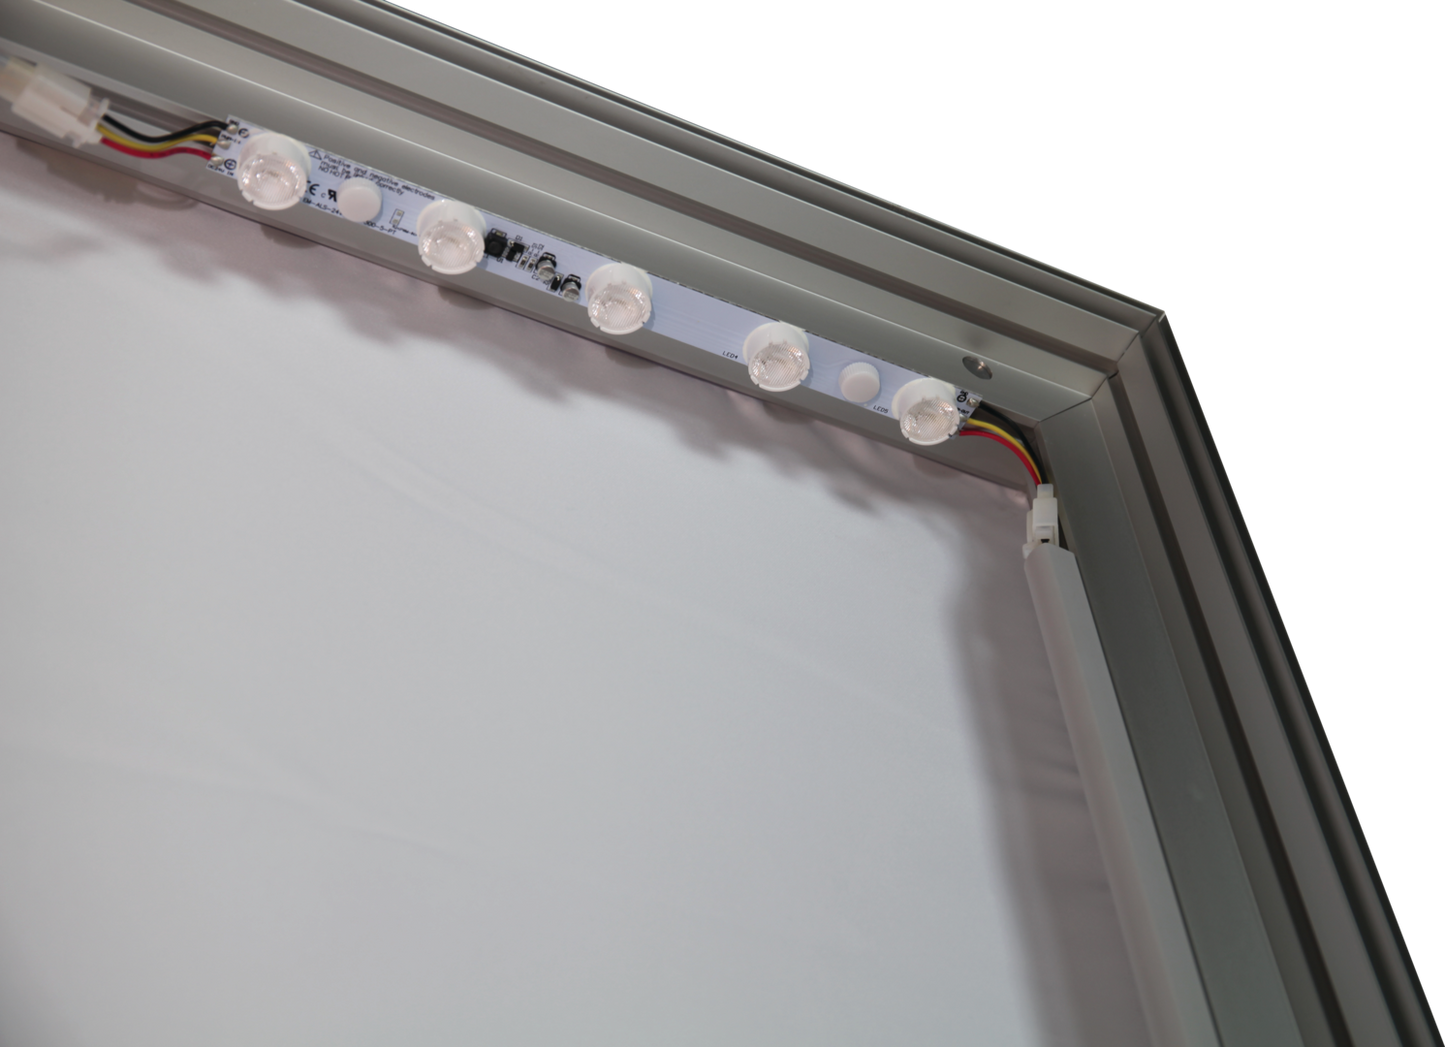 40ft x 4ft Vector Frame Hanging Light Box Single-Sided (Graphic Package)